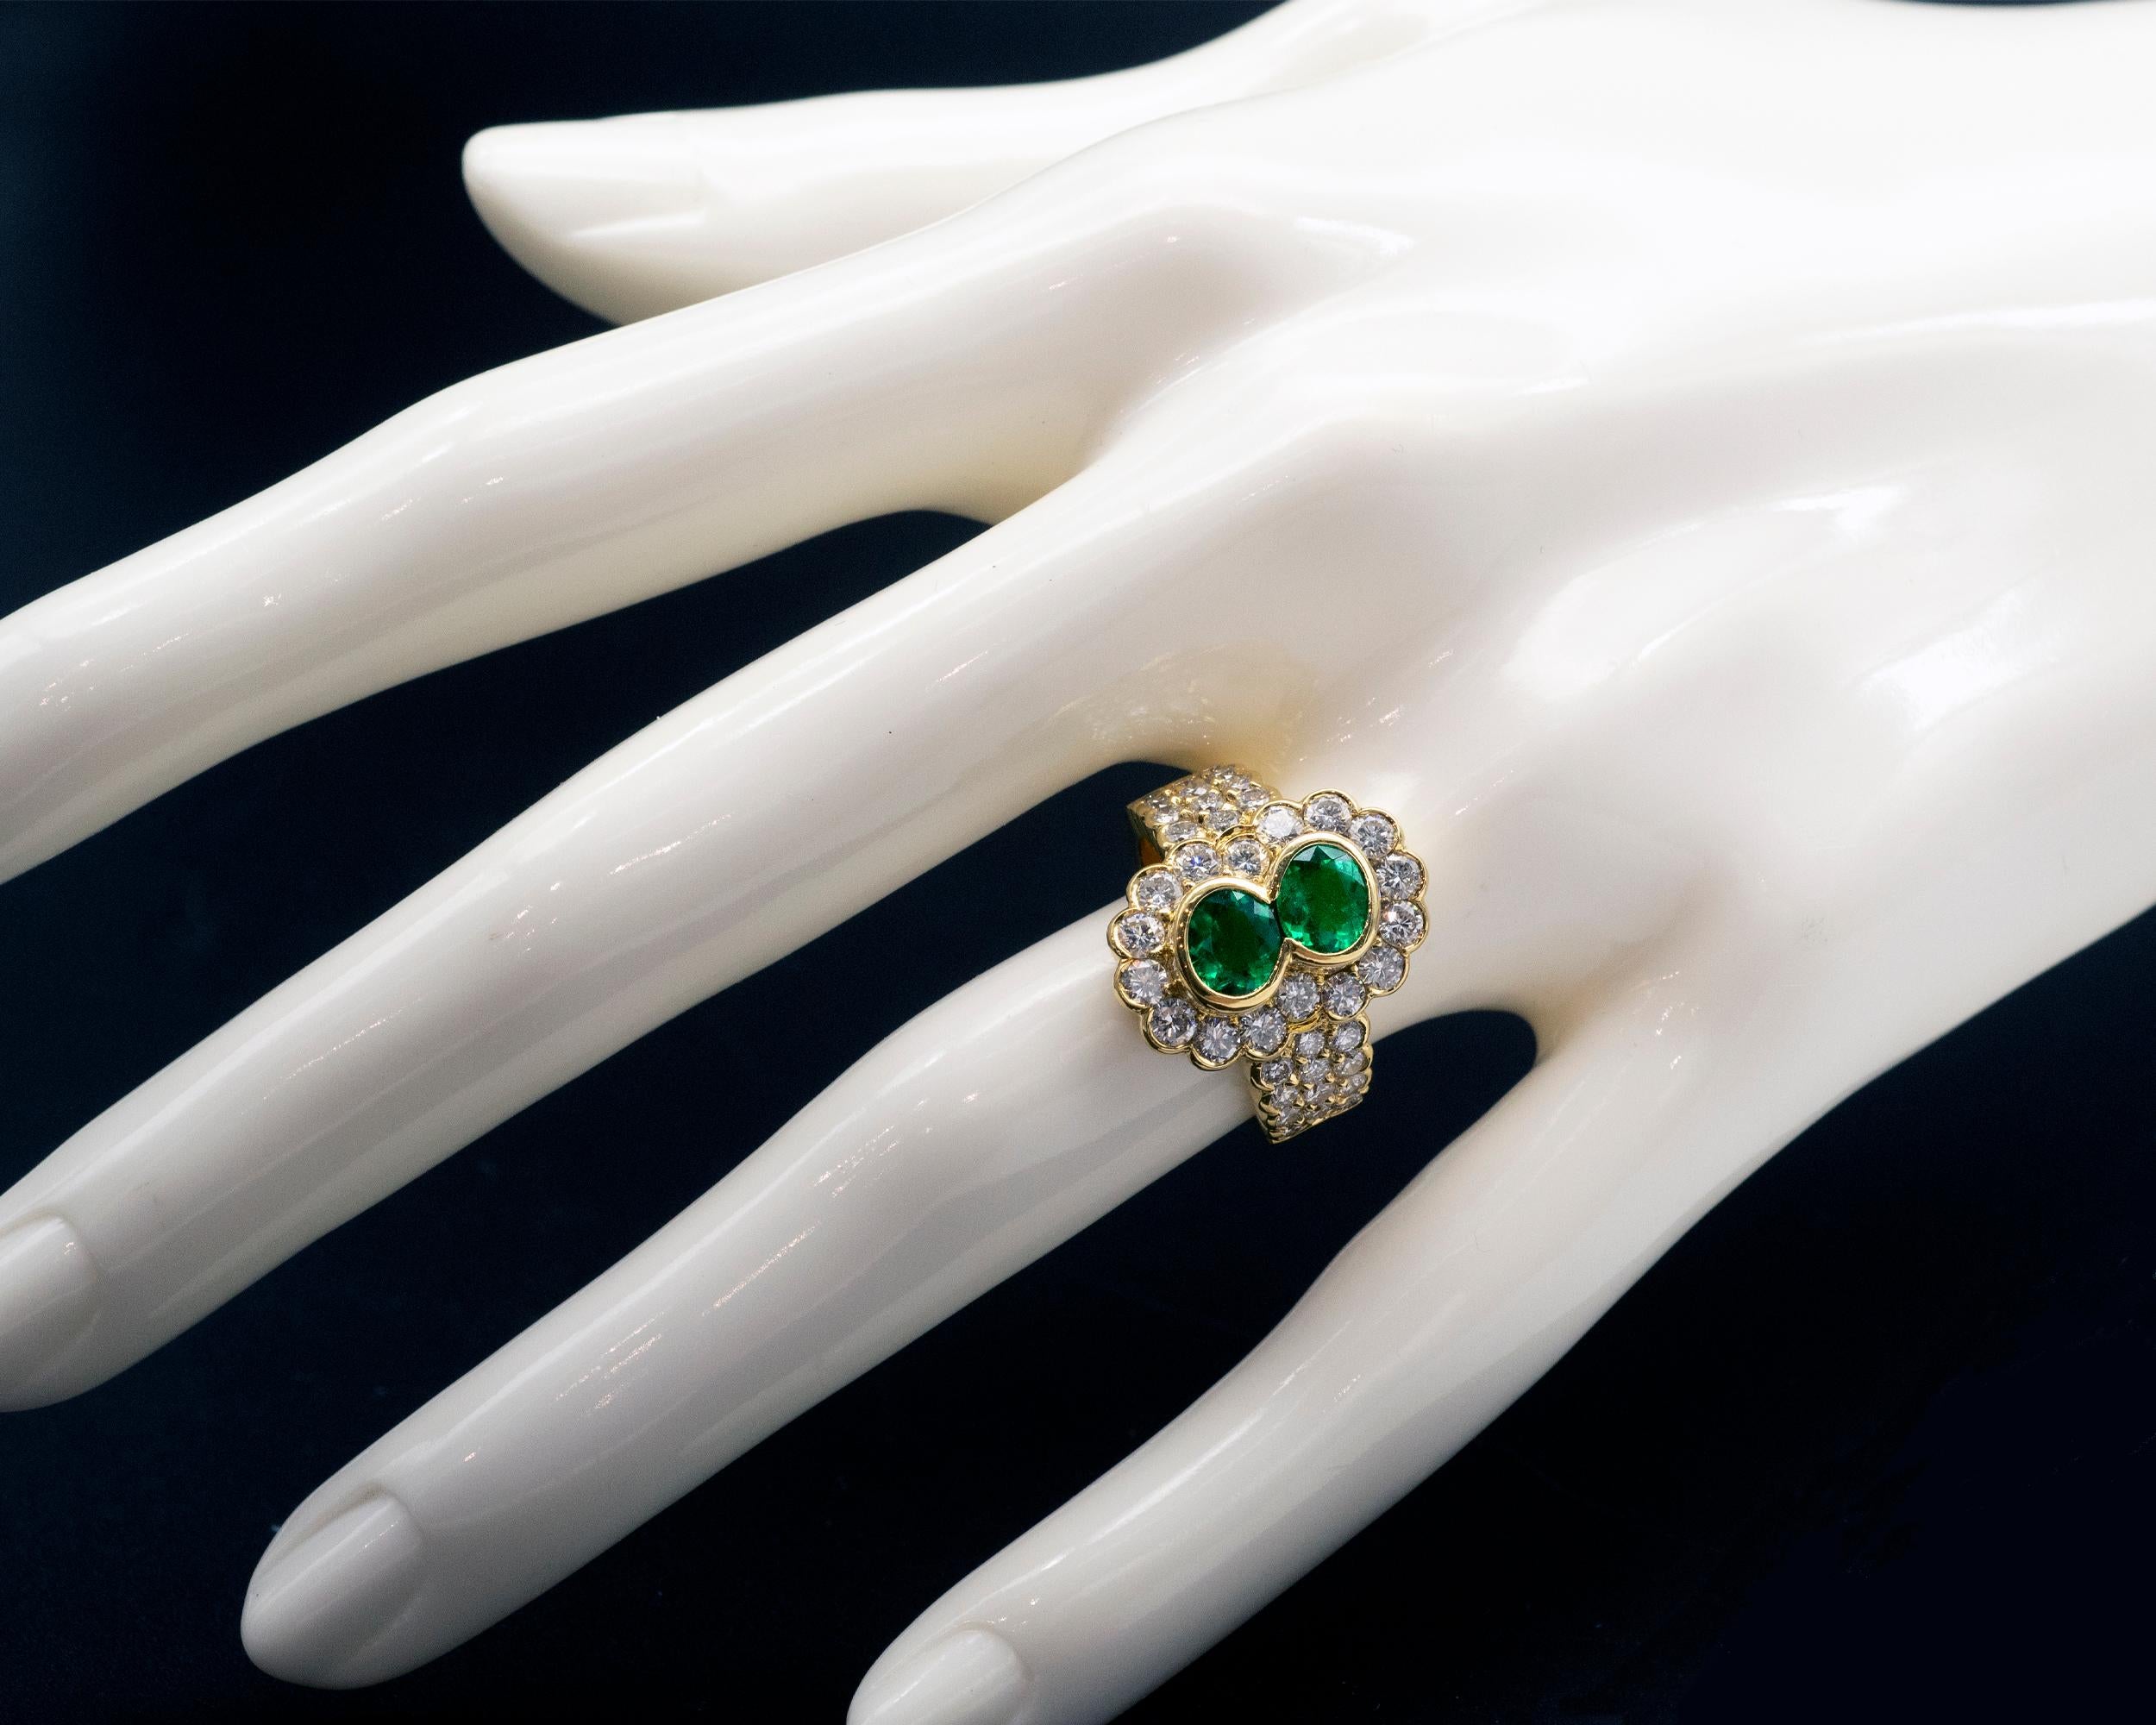 It is an opulent emerald ring showcasing two vibrant green oval emeralds. It is a one-of-a-kind halo ring with round brilliant cut diamonds skilfully set around the center gemstones as well as on the shaft. The whole ring is handmade in solid 18